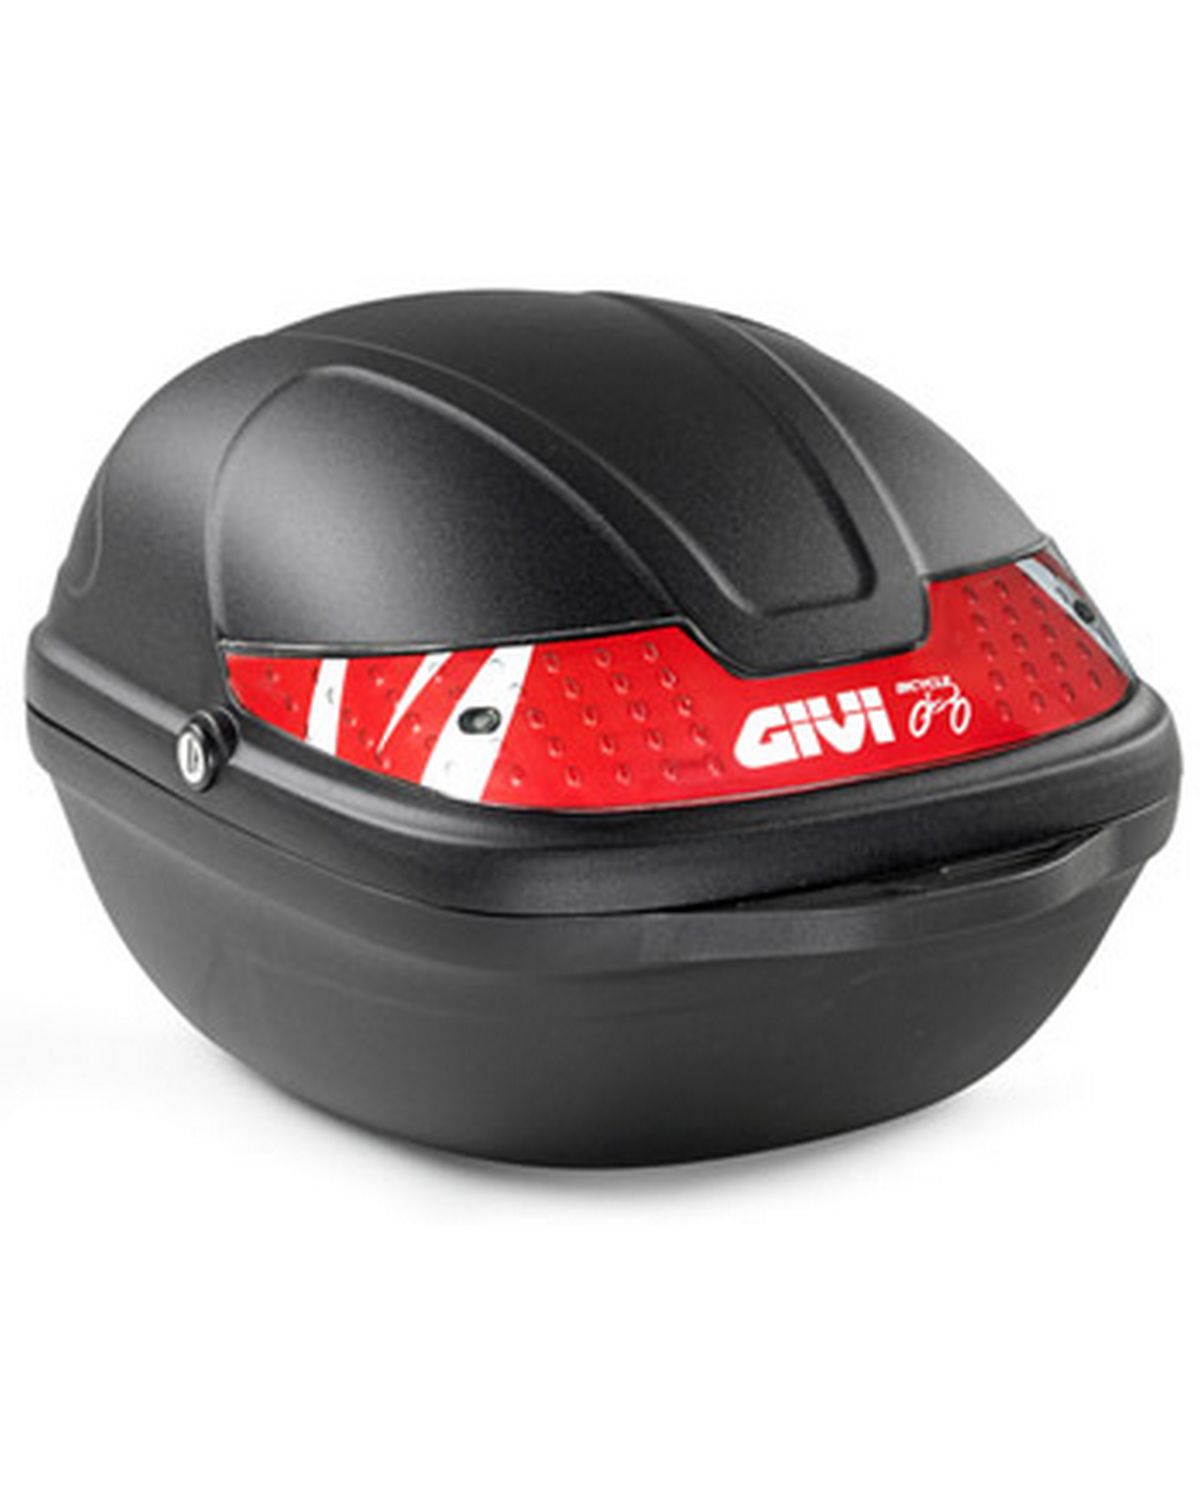 https://www.cardy.fr/images/large/givi-top-case-velo-cy14n-14-litres_156709.jpg